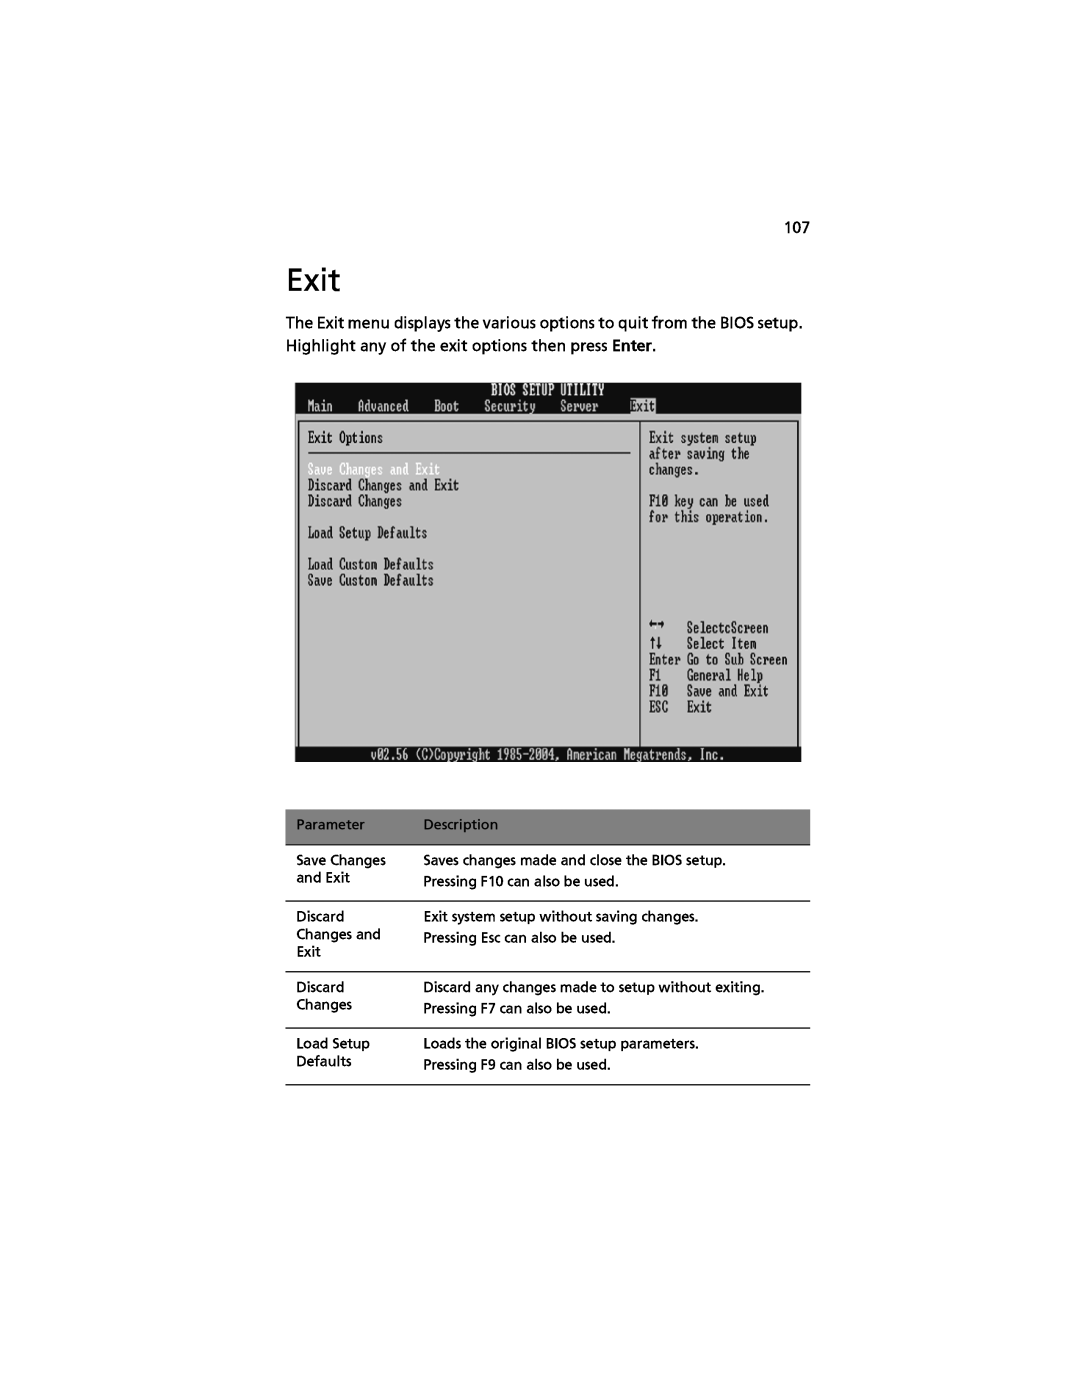 Acer G520 series manual Exit 